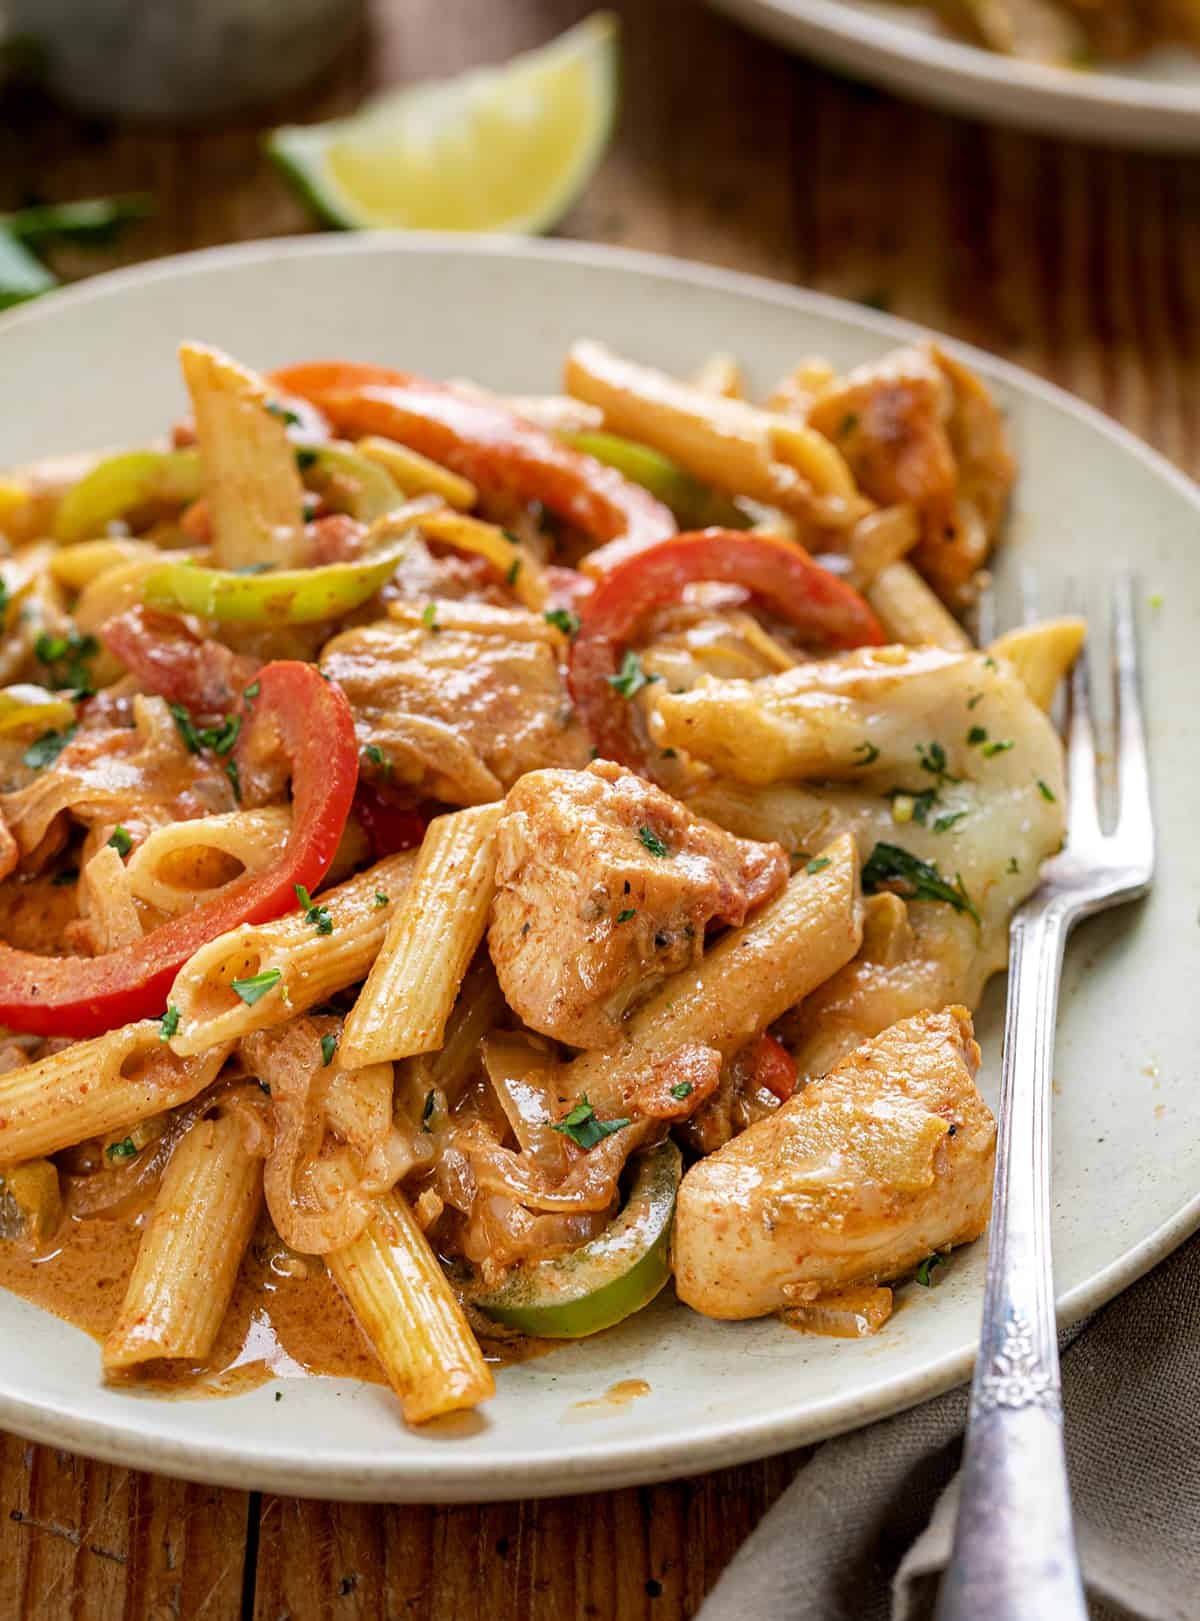 Close up of a Plate of Chicken Fajita Pasta with Limes in the Background.